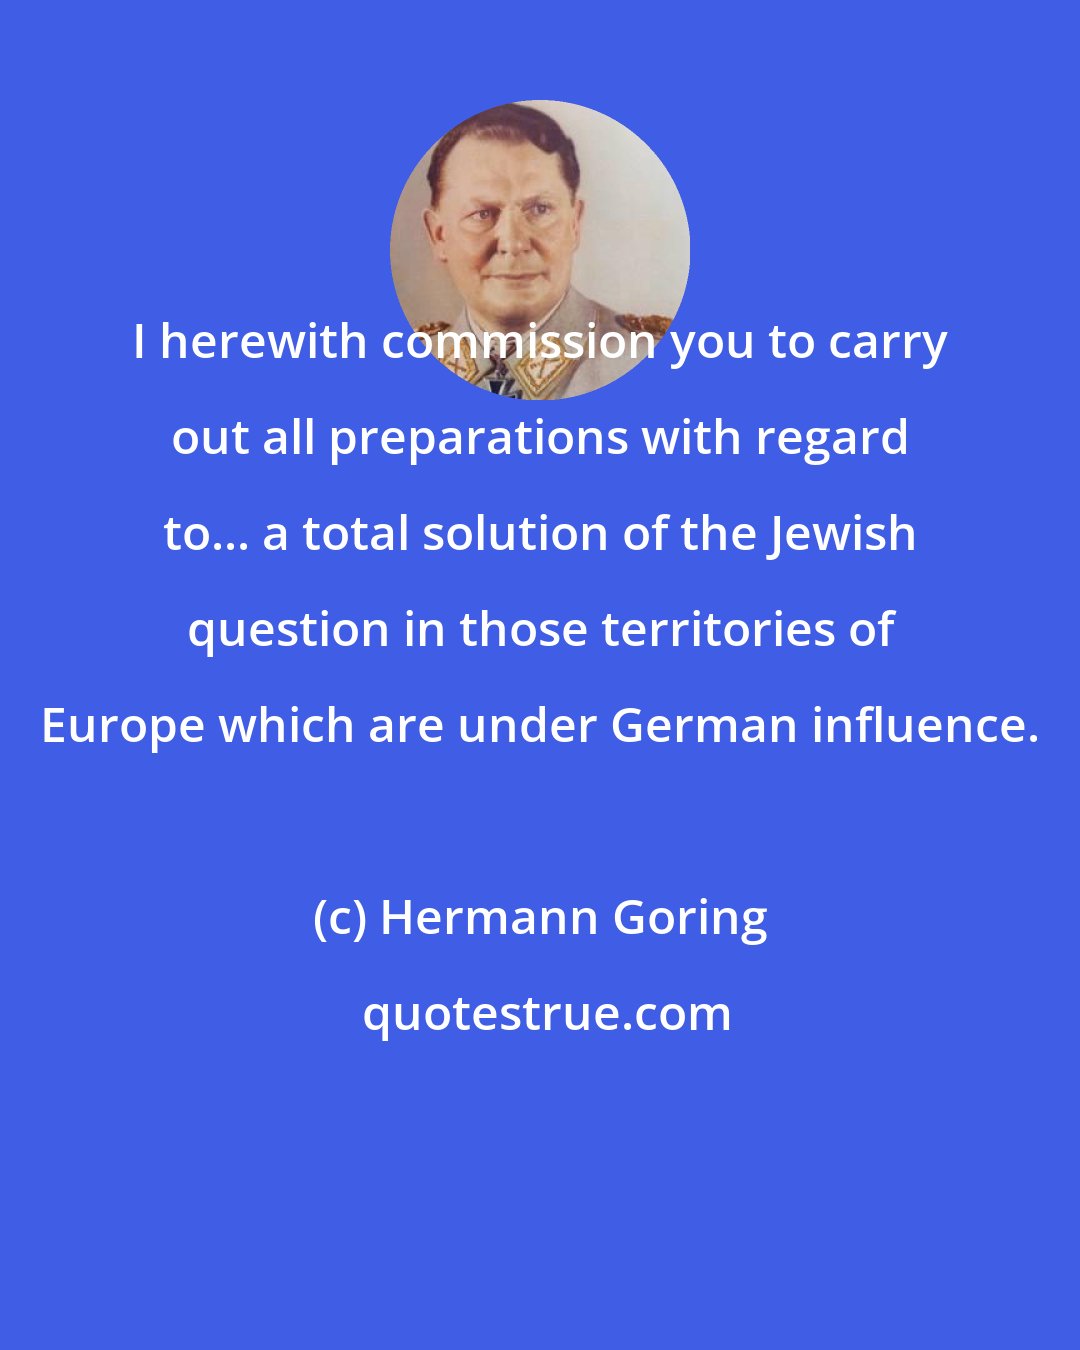 Hermann Goring: I herewith commission you to carry out all preparations with regard to... a total solution of the Jewish question in those territories of Europe which are under German influence.